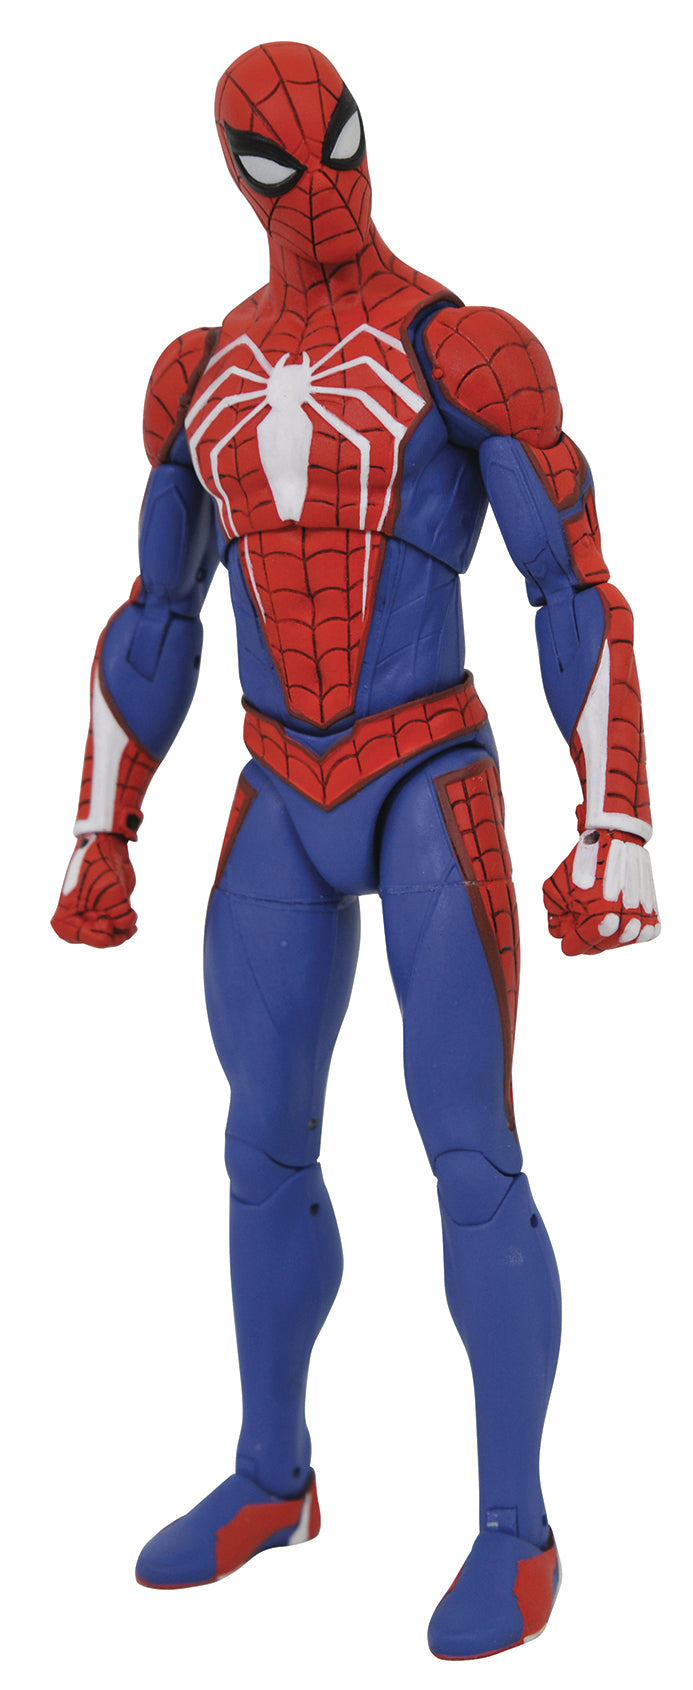 MARVEL SELECT SPIDER-MAN VIDEO GAME PS4 FIGURE